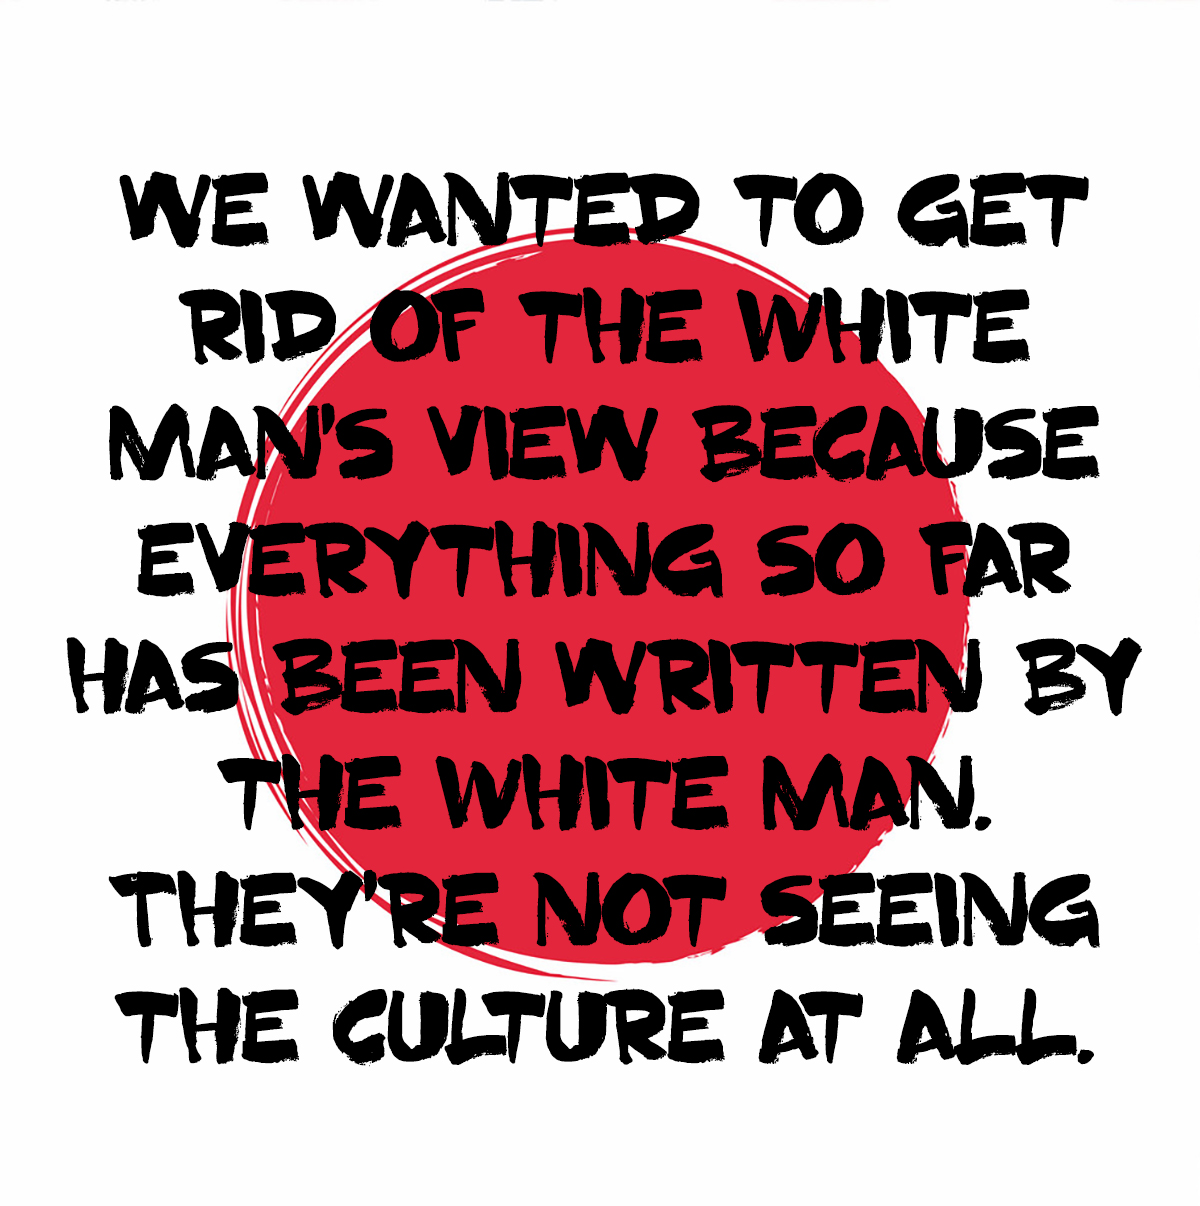 we wanted to get rid of the White man's view because everything so far has been written by the White man. They're not seeing the culture at all - DeSnoo on her Yasuke Documentary